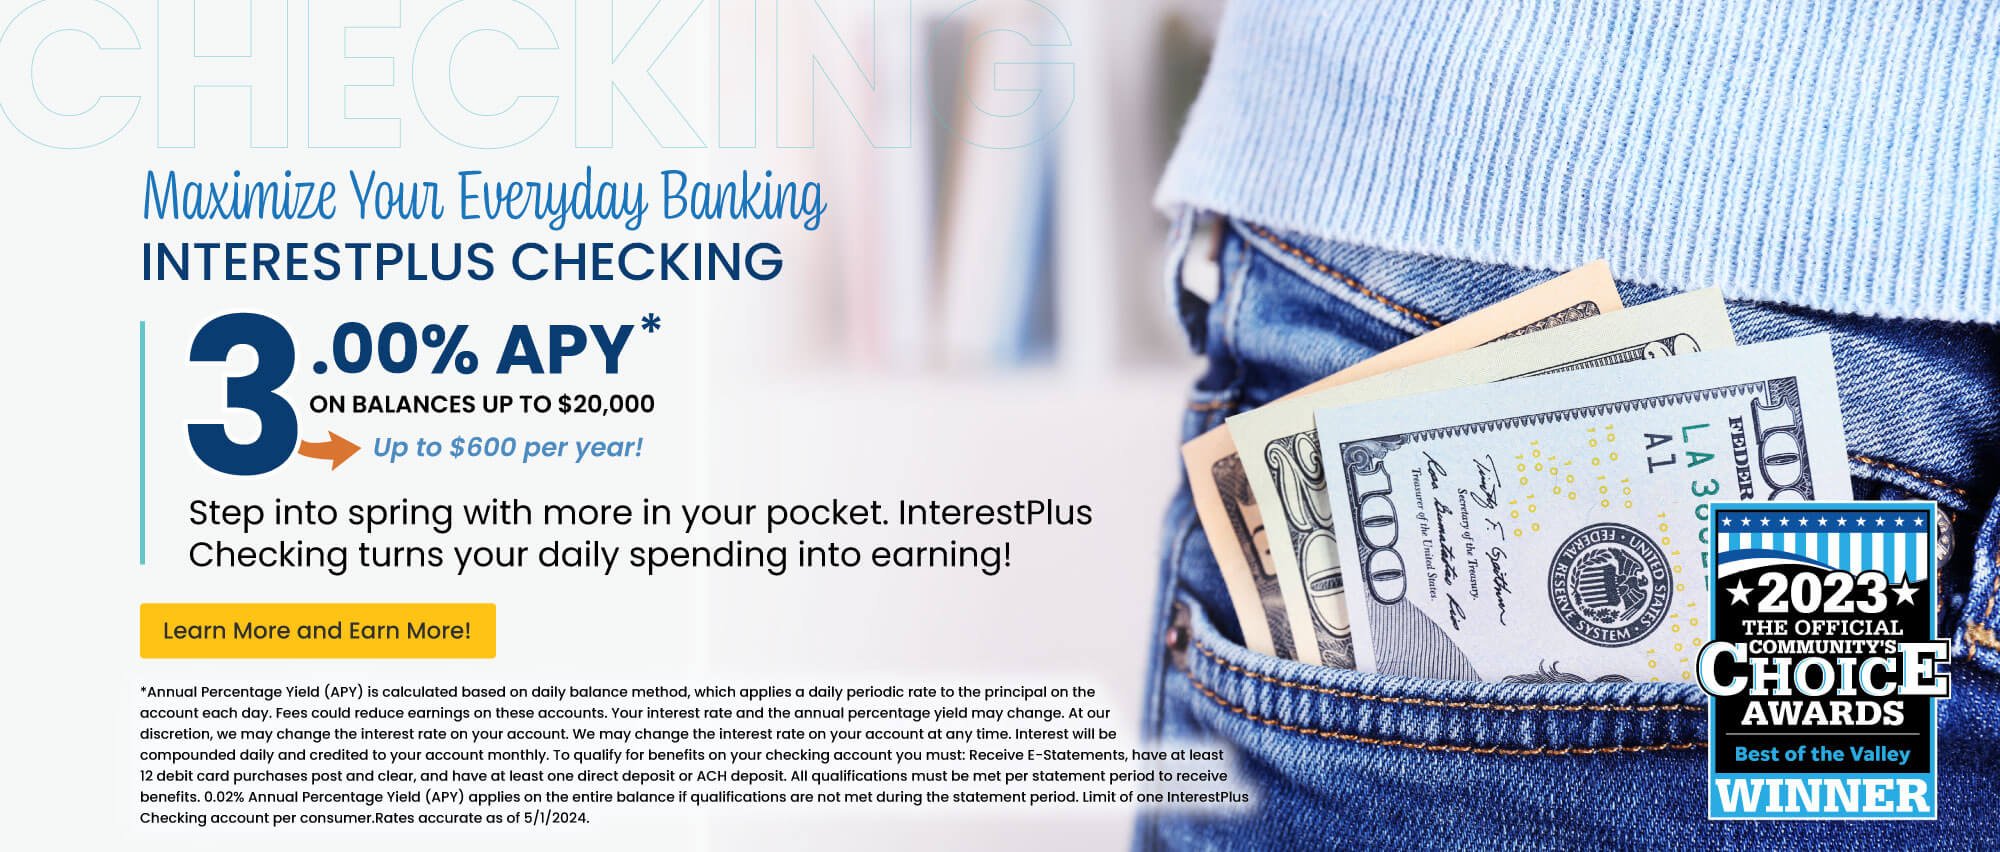 Maximize Your Everyday Banking. InterestPlus Checking. 3.00% APY on balances up to $20,000. Up to $600 per year! Learn more and earn more!